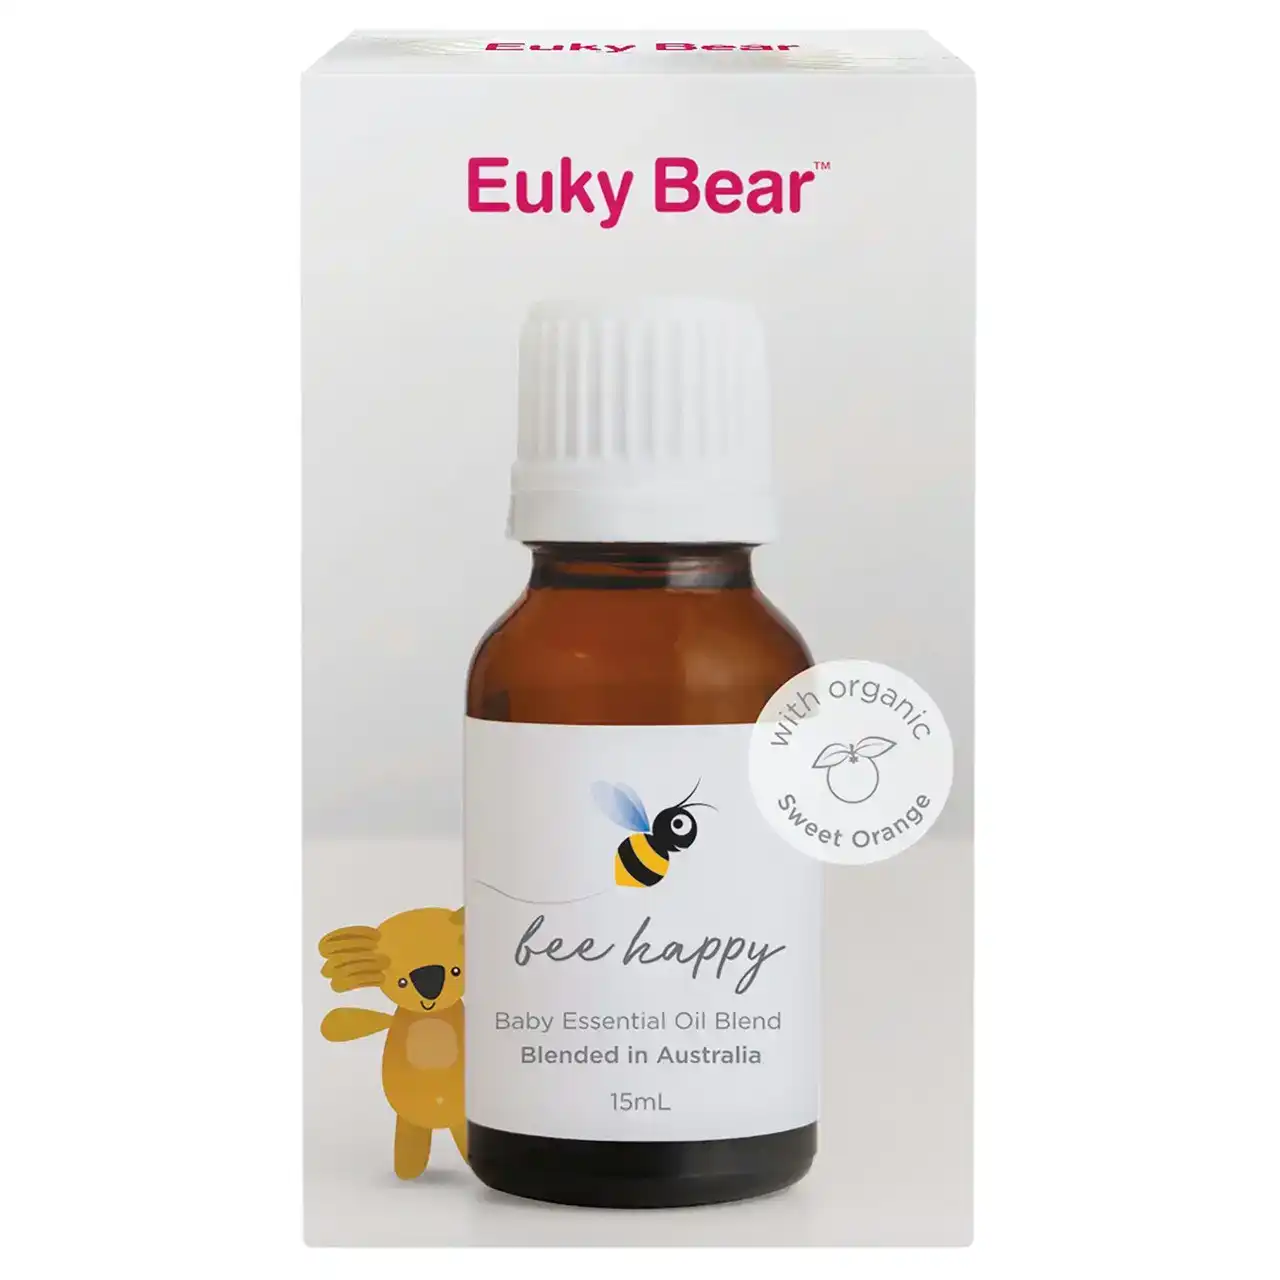 Euky Bear Bee Happy Baby Essential Oil Blend 15mL